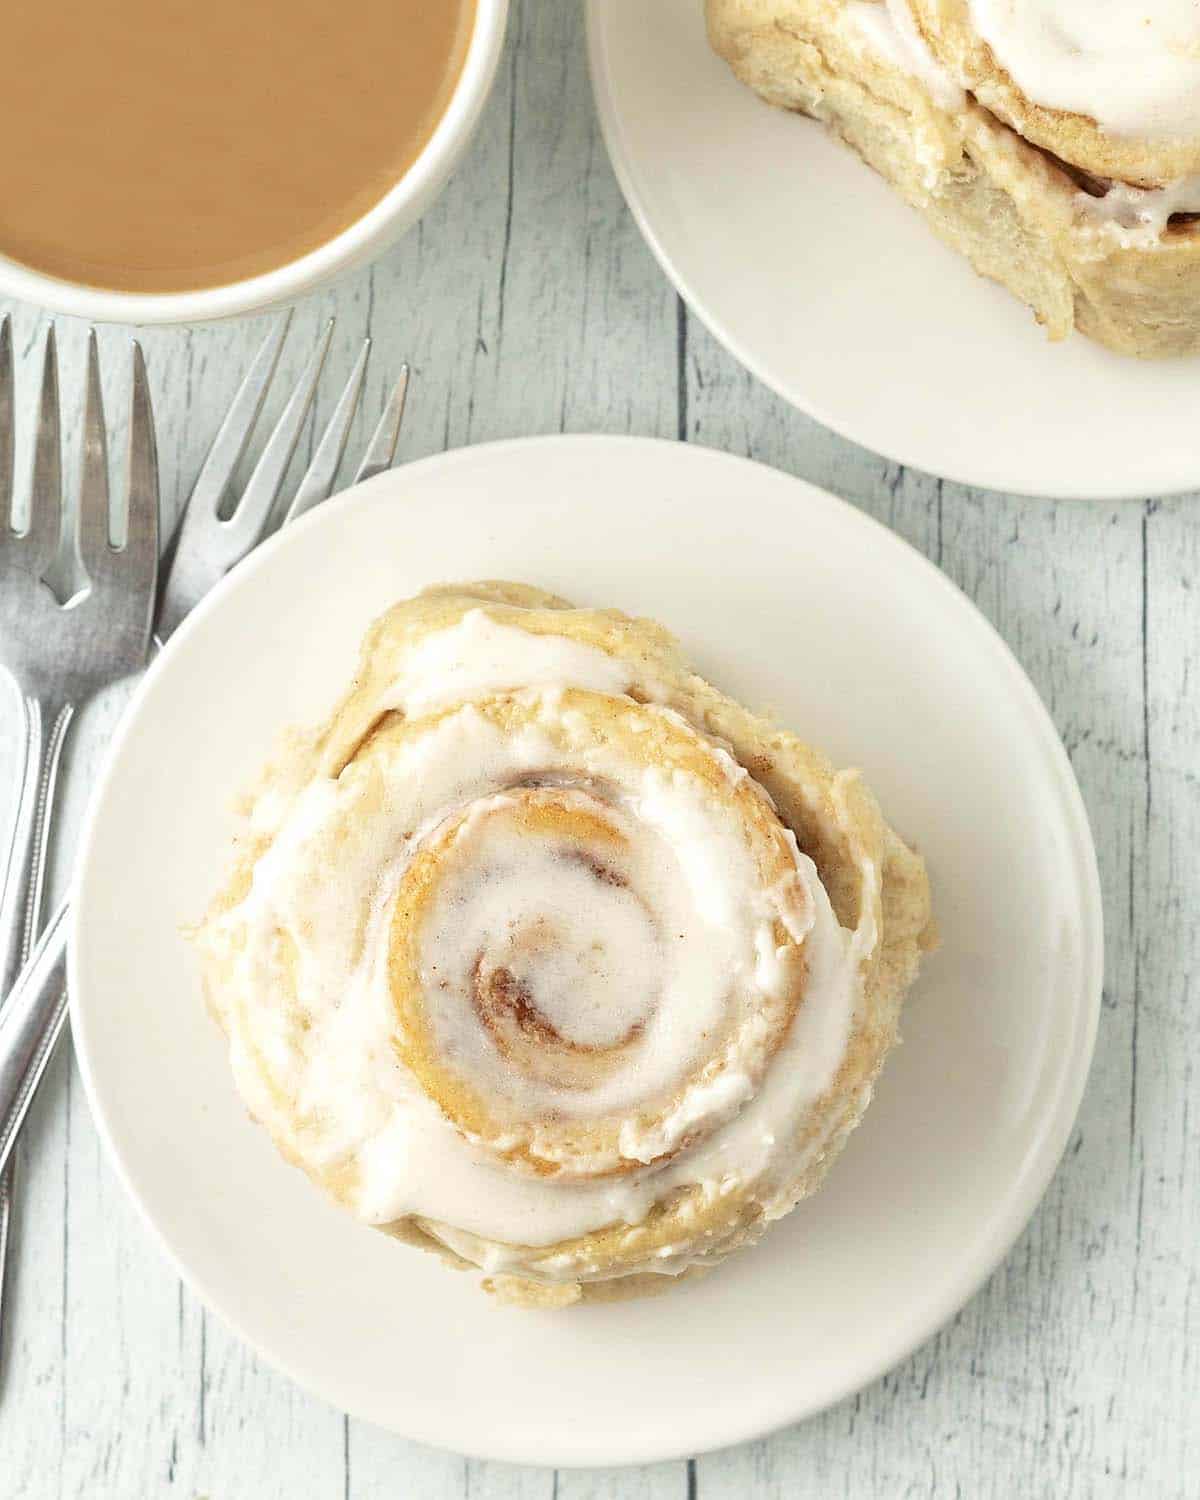 Overhead image showing a frosted cinnamon roll on a white plate.